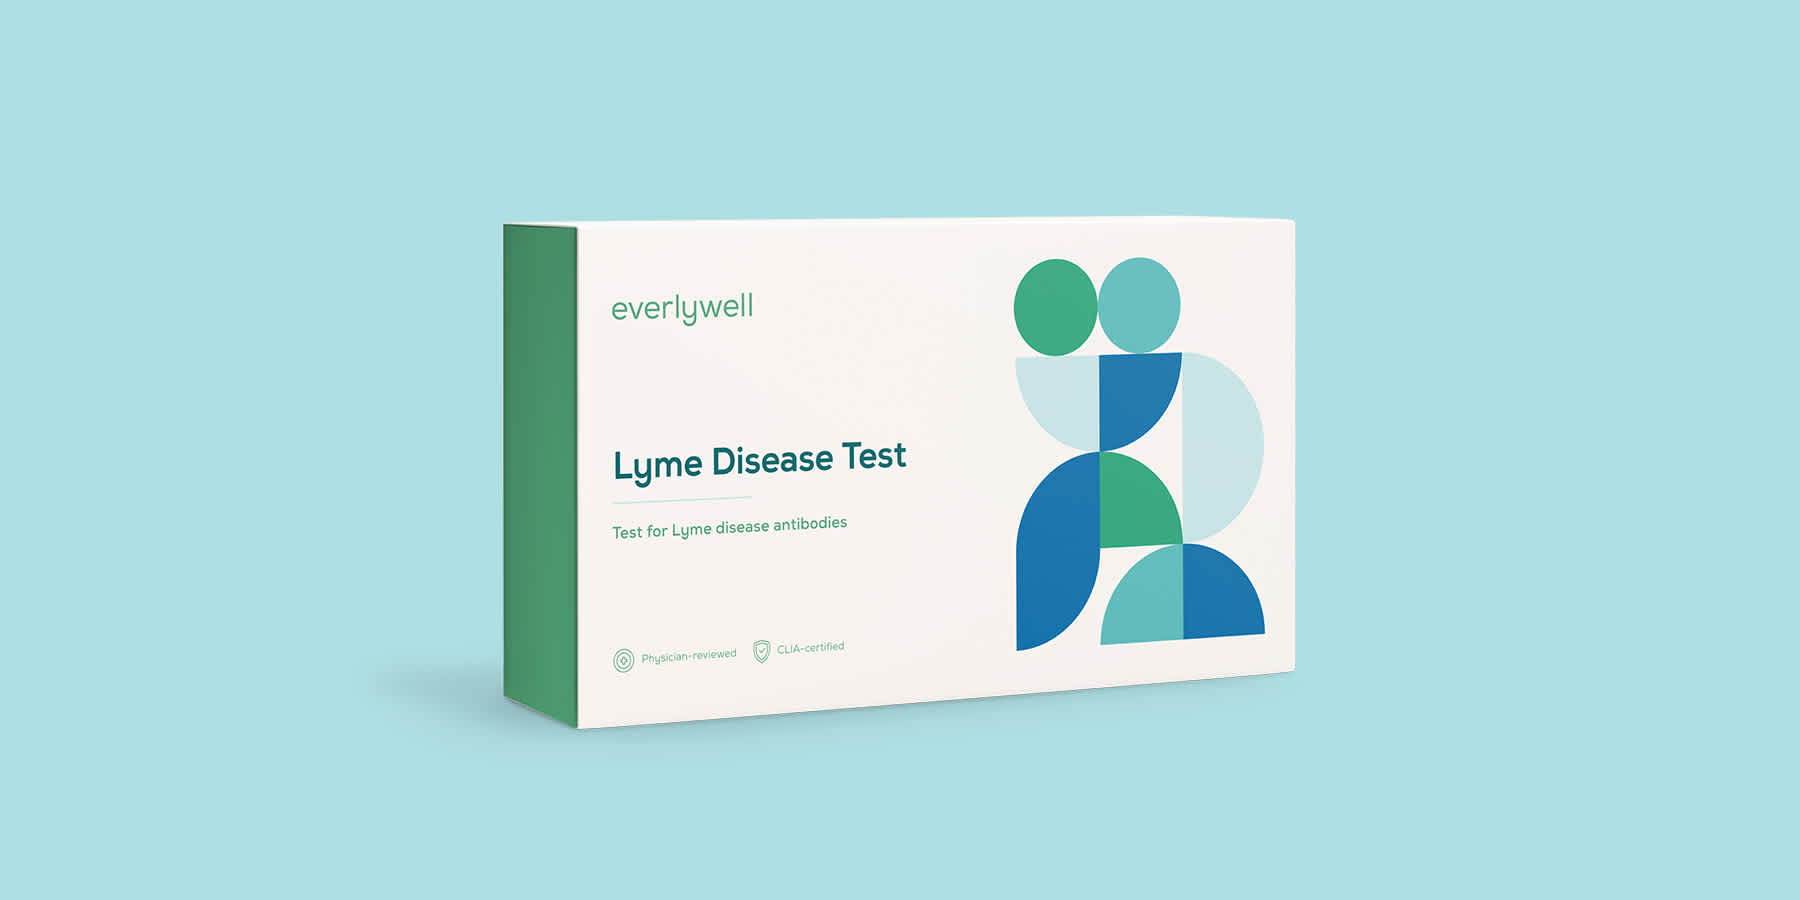 Image of Everlywell at-home Lyme Disease Test kit